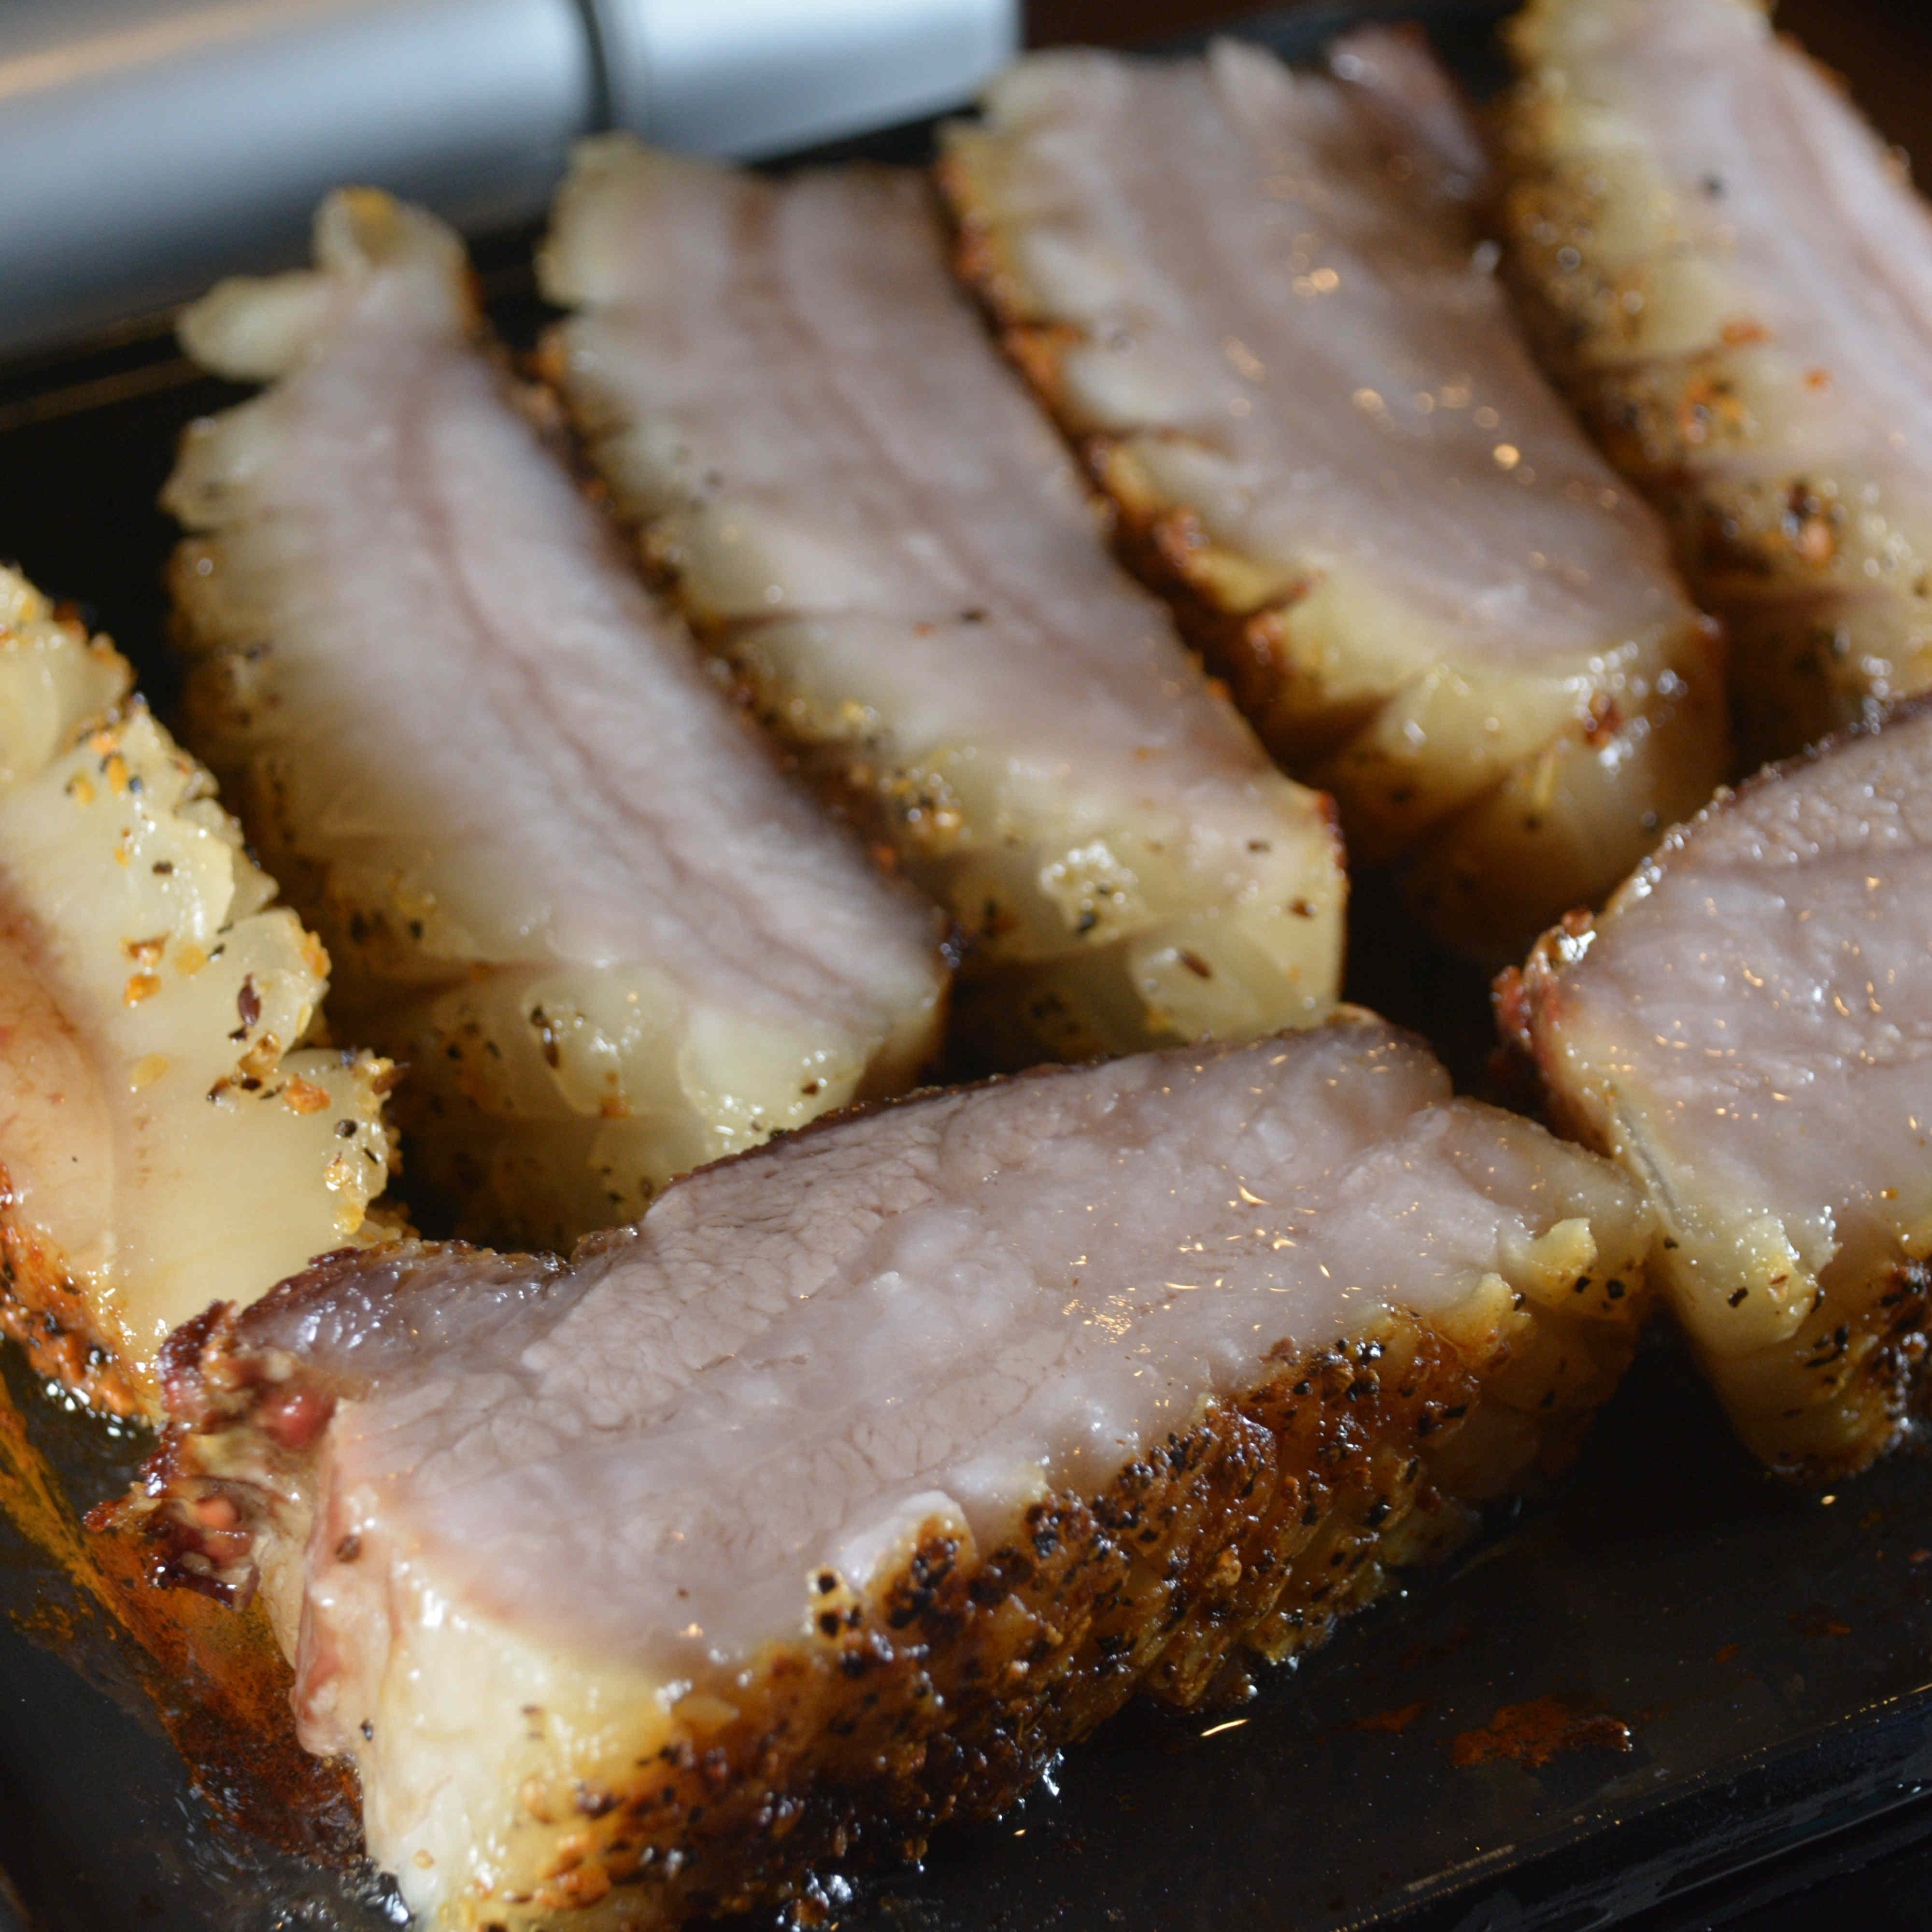 pork belly cooked on Cinder grill indoor grill precision cooker 